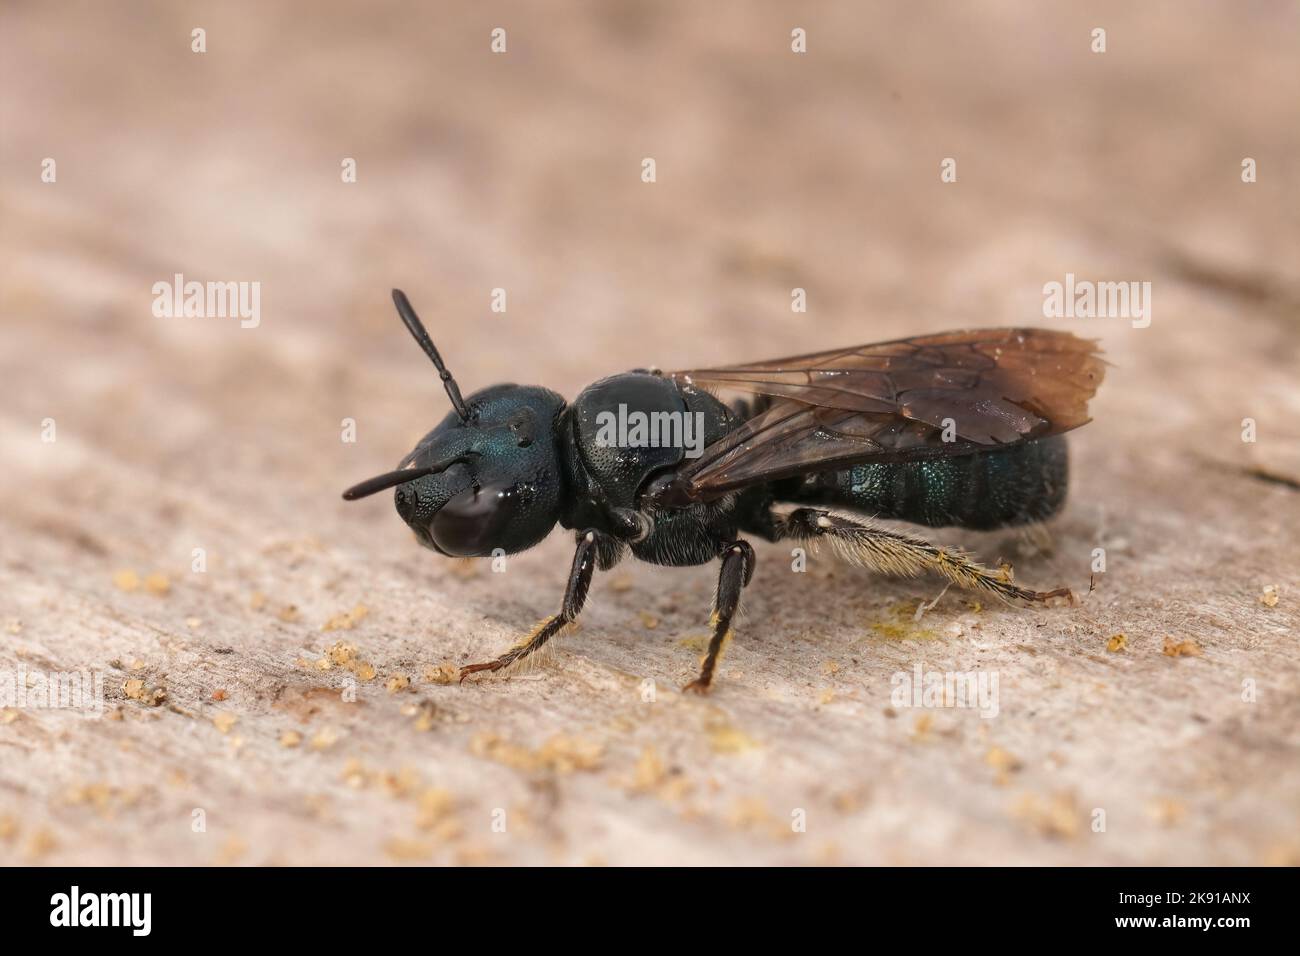 A closeup shot of a small carpenter bee on wood Stock Photo